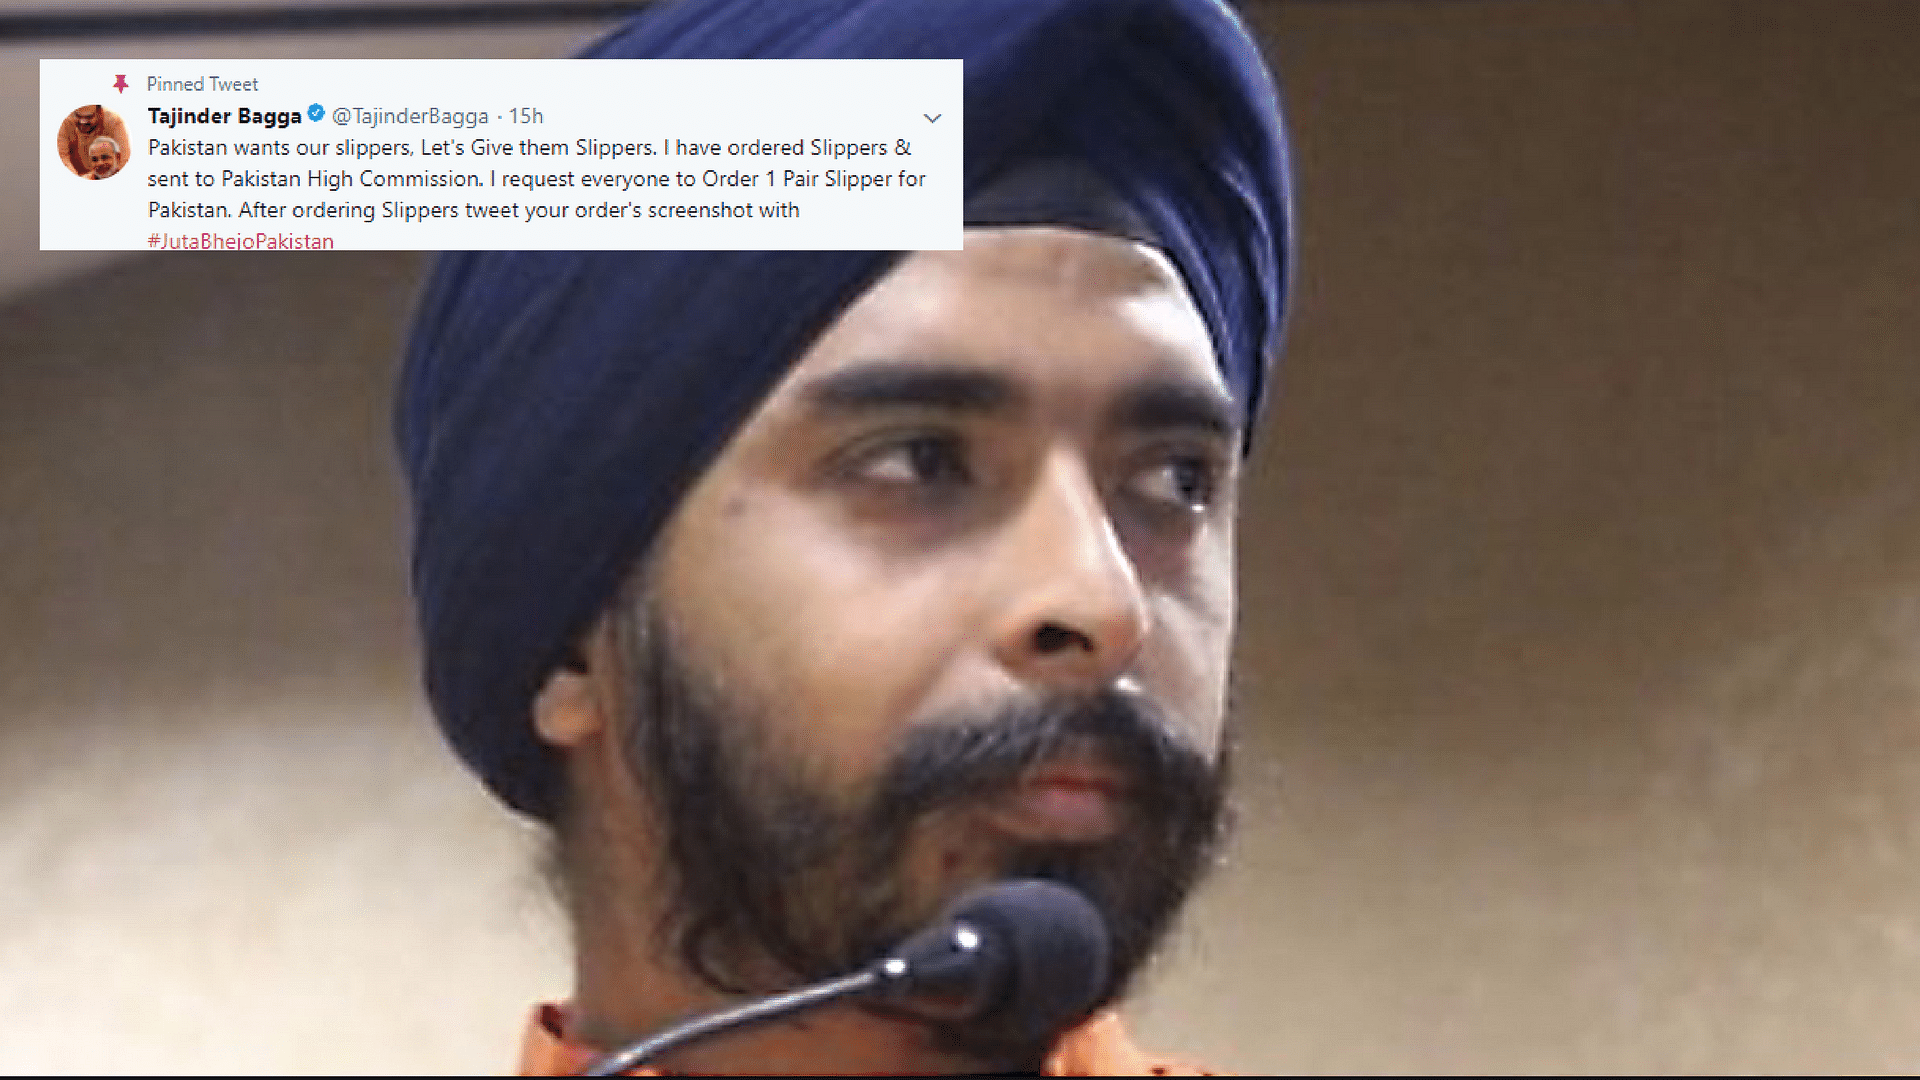 Delhi BJP spokesperson Tajinder Pal Singh Bagga bought the footwear online and gave the address of the Pakistan High Commission for its delivery.